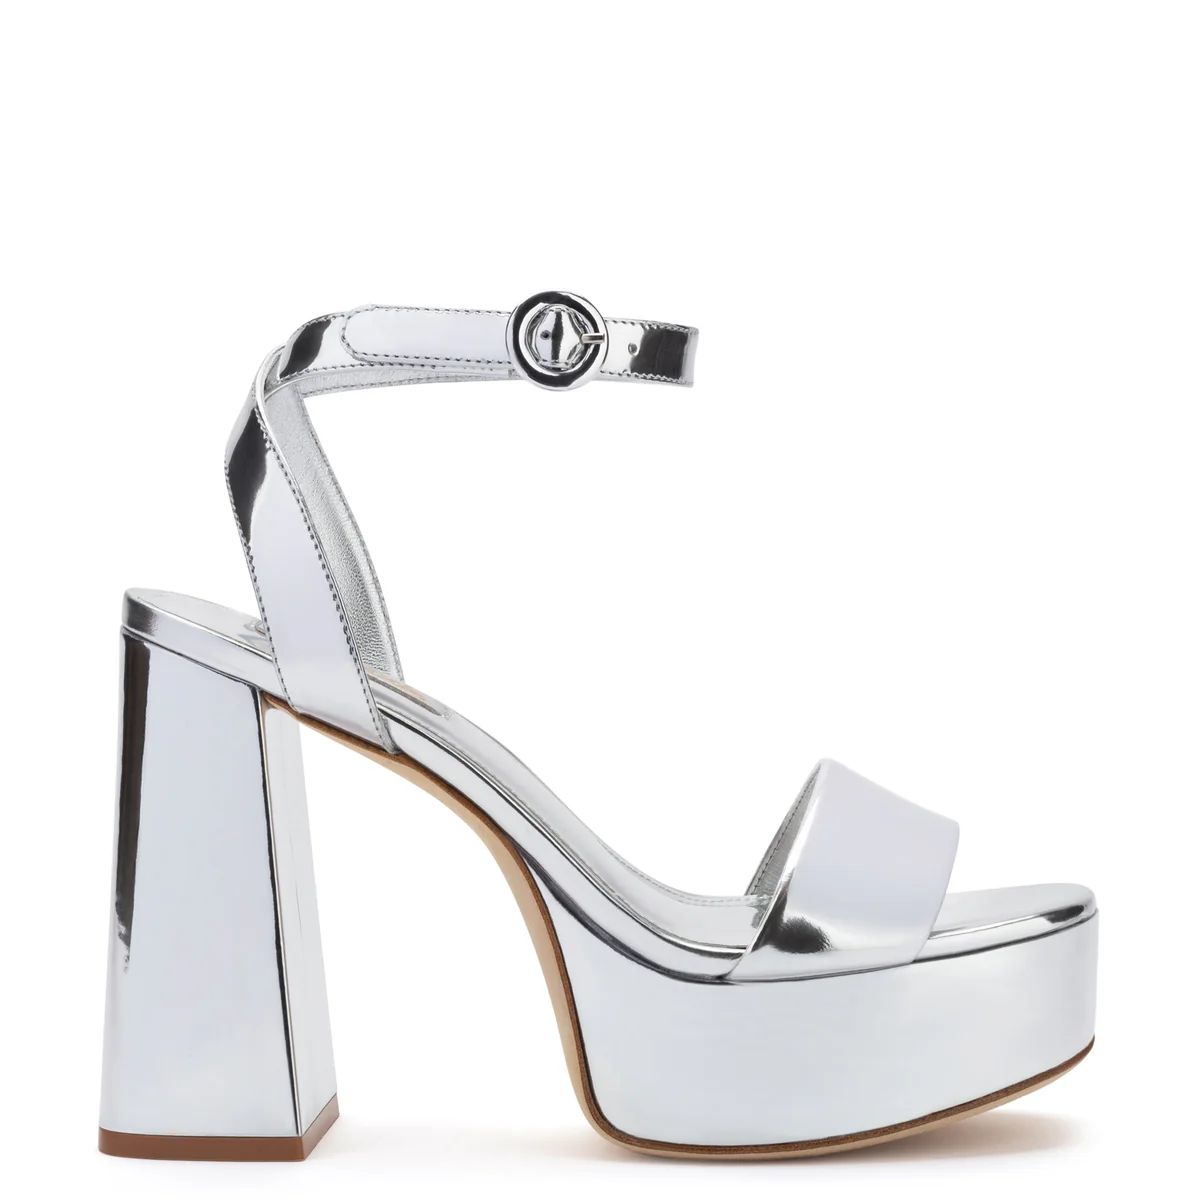 Dolly Sandal In Silver Specchio | Over The Moon